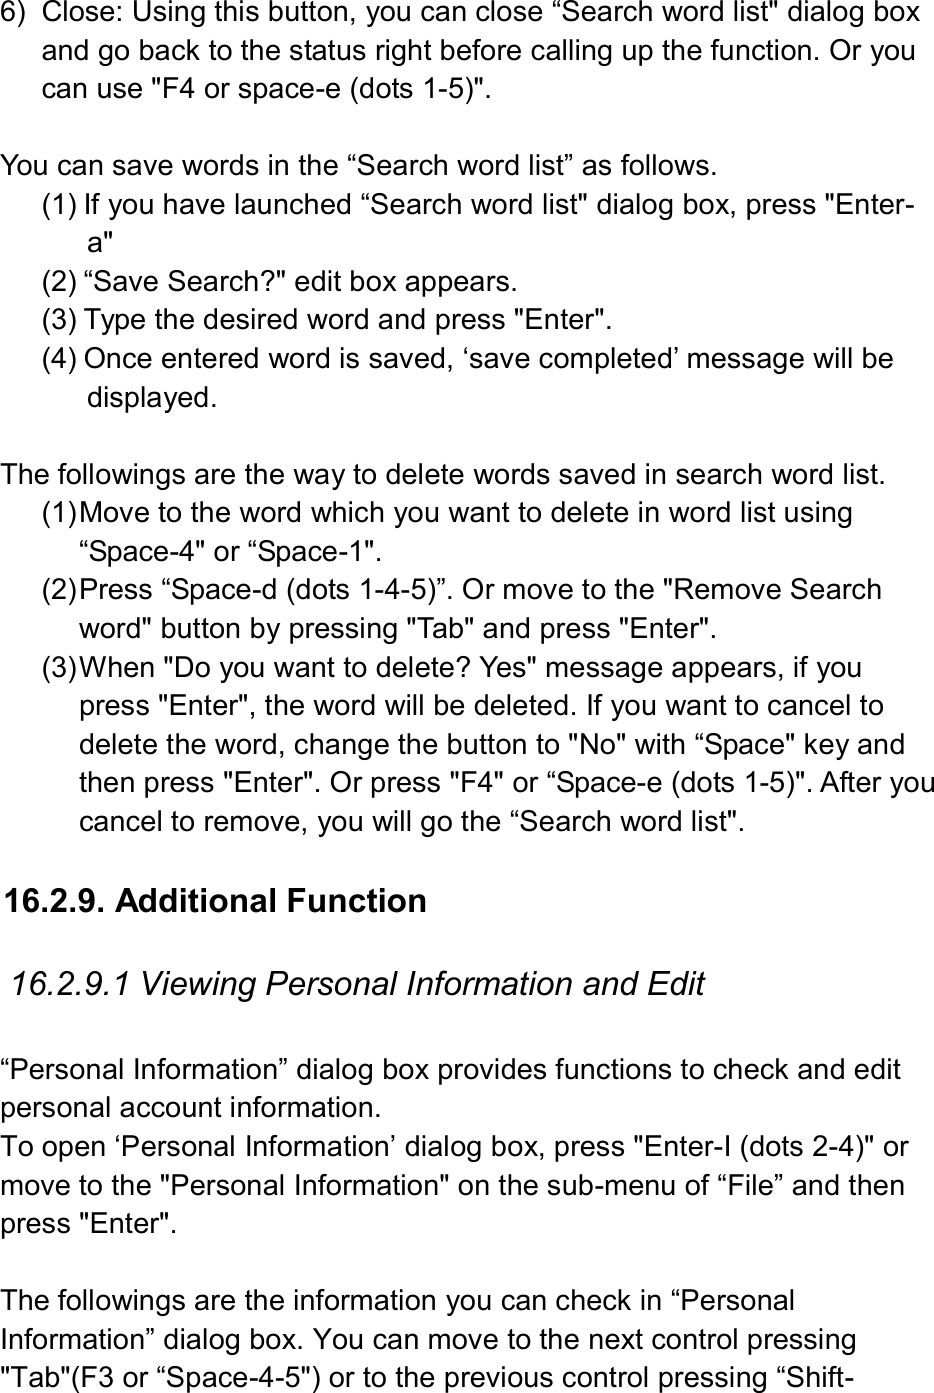  6)  Close: Using this button, you can close “Search word list&quot; dialog box and go back to the status right before calling up the function. Or you can use &quot;F4 or space-e (dots 1-5)&quot;.    You can save words in the “Search word list” as follows. (1) If you have launched “Search word list&quot; dialog box, press &quot;Enter-a&quot; (2) “Save Search?&quot; edit box appears.   (3) Type the desired word and press &quot;Enter&quot;. (4) Once entered word is saved, ‘save completed’ message will be displayed.  The followings are the way to delete words saved in search word list. (1) Move to the word which you want to delete in word list using “Space-4&quot; or “Space-1&quot;. (2) Press “Space-d (dots 1-4-5)”. Or move to the &quot;Remove Search word&quot; button by pressing &quot;Tab&quot; and press &quot;Enter&quot;. (3) When &quot;Do you want to delete? Yes&quot; message appears, if you press &quot;Enter&quot;, the word will be deleted. If you want to cancel to delete the word, change the button to &quot;No&quot; with “Space&quot; key and then press &quot;Enter&quot;. Or press &quot;F4&quot; or “Space-e (dots 1-5)&quot;. After you cancel to remove, you will go the “Search word list&quot;.    16.2.9. Additional Function  16.2.9.1 Viewing Personal Information and Edit  “Personal Information” dialog box provides functions to check and edit personal account information. To open ‘Personal Information’ dialog box, press &quot;Enter-I (dots 2-4)&quot; or move to the &quot;Personal Information&quot; on the sub-menu of “File” and then press &quot;Enter&quot;.  The followings are the information you can check in “Personal Information” dialog box. You can move to the next control pressing &quot;Tab&quot;(F3 or “Space-4-5&quot;) or to the previous control pressing “Shift-